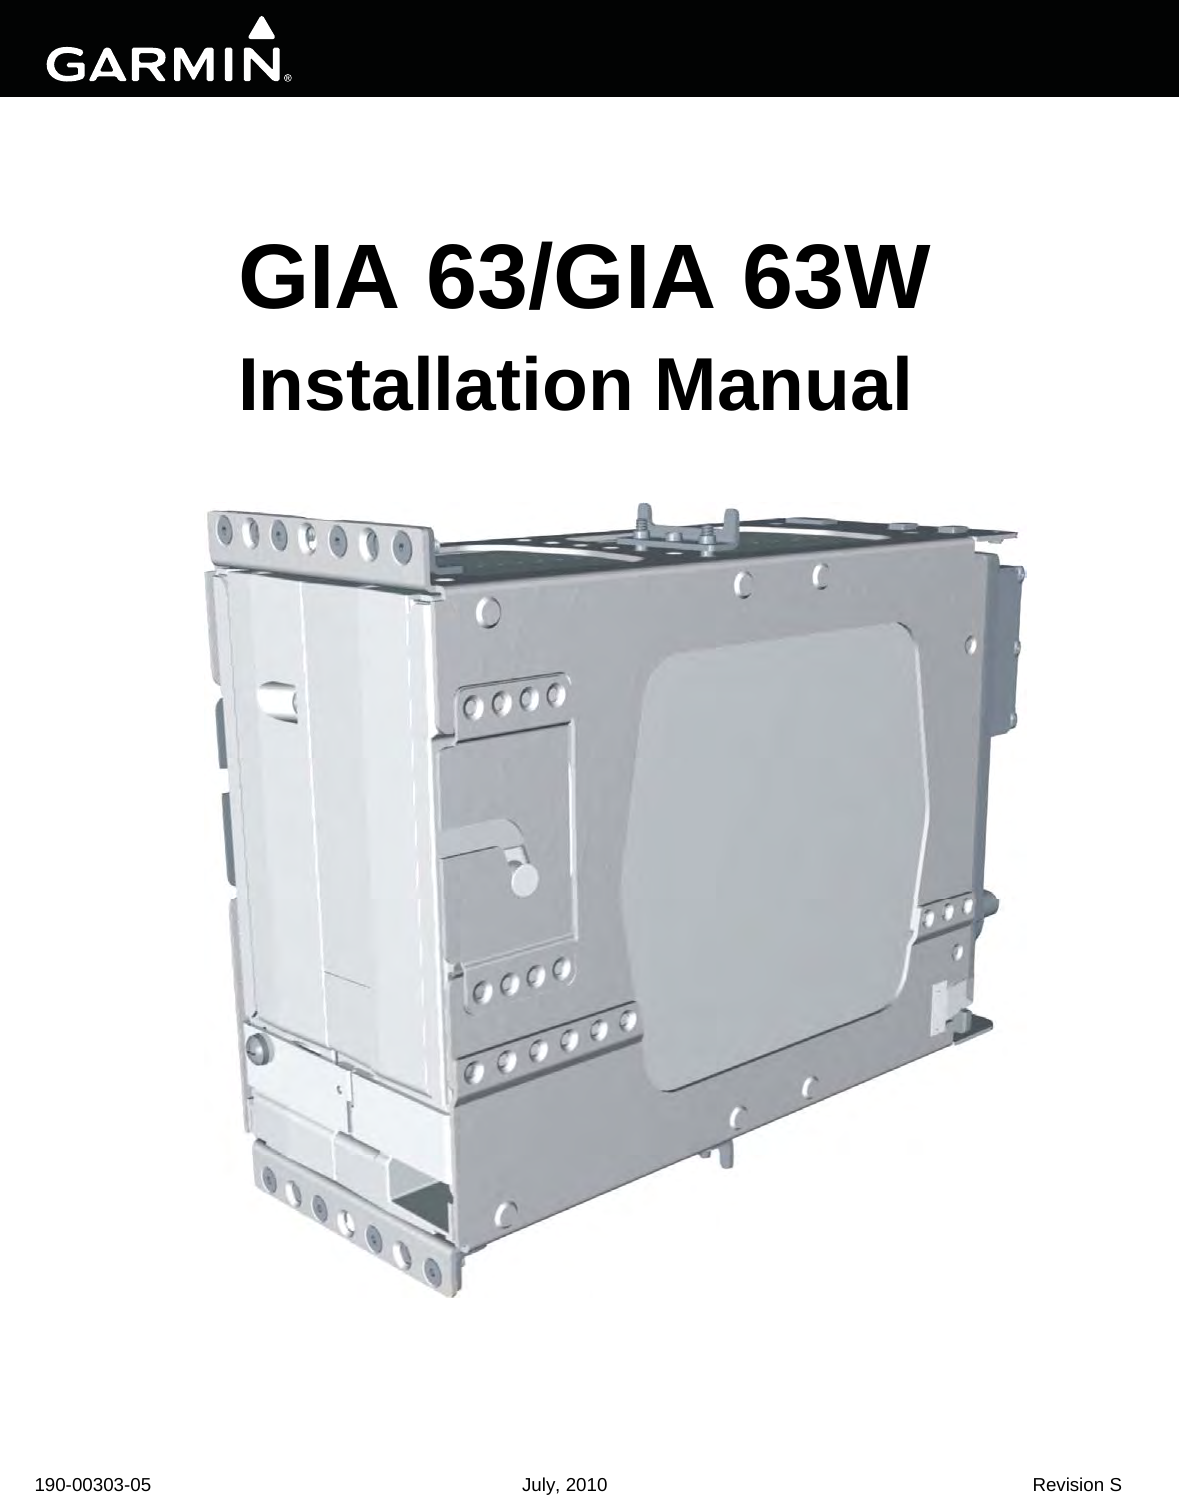   190-00303-05 July, 2010  Revision S                   GIA 63/GIA 63W  Installation Manual 